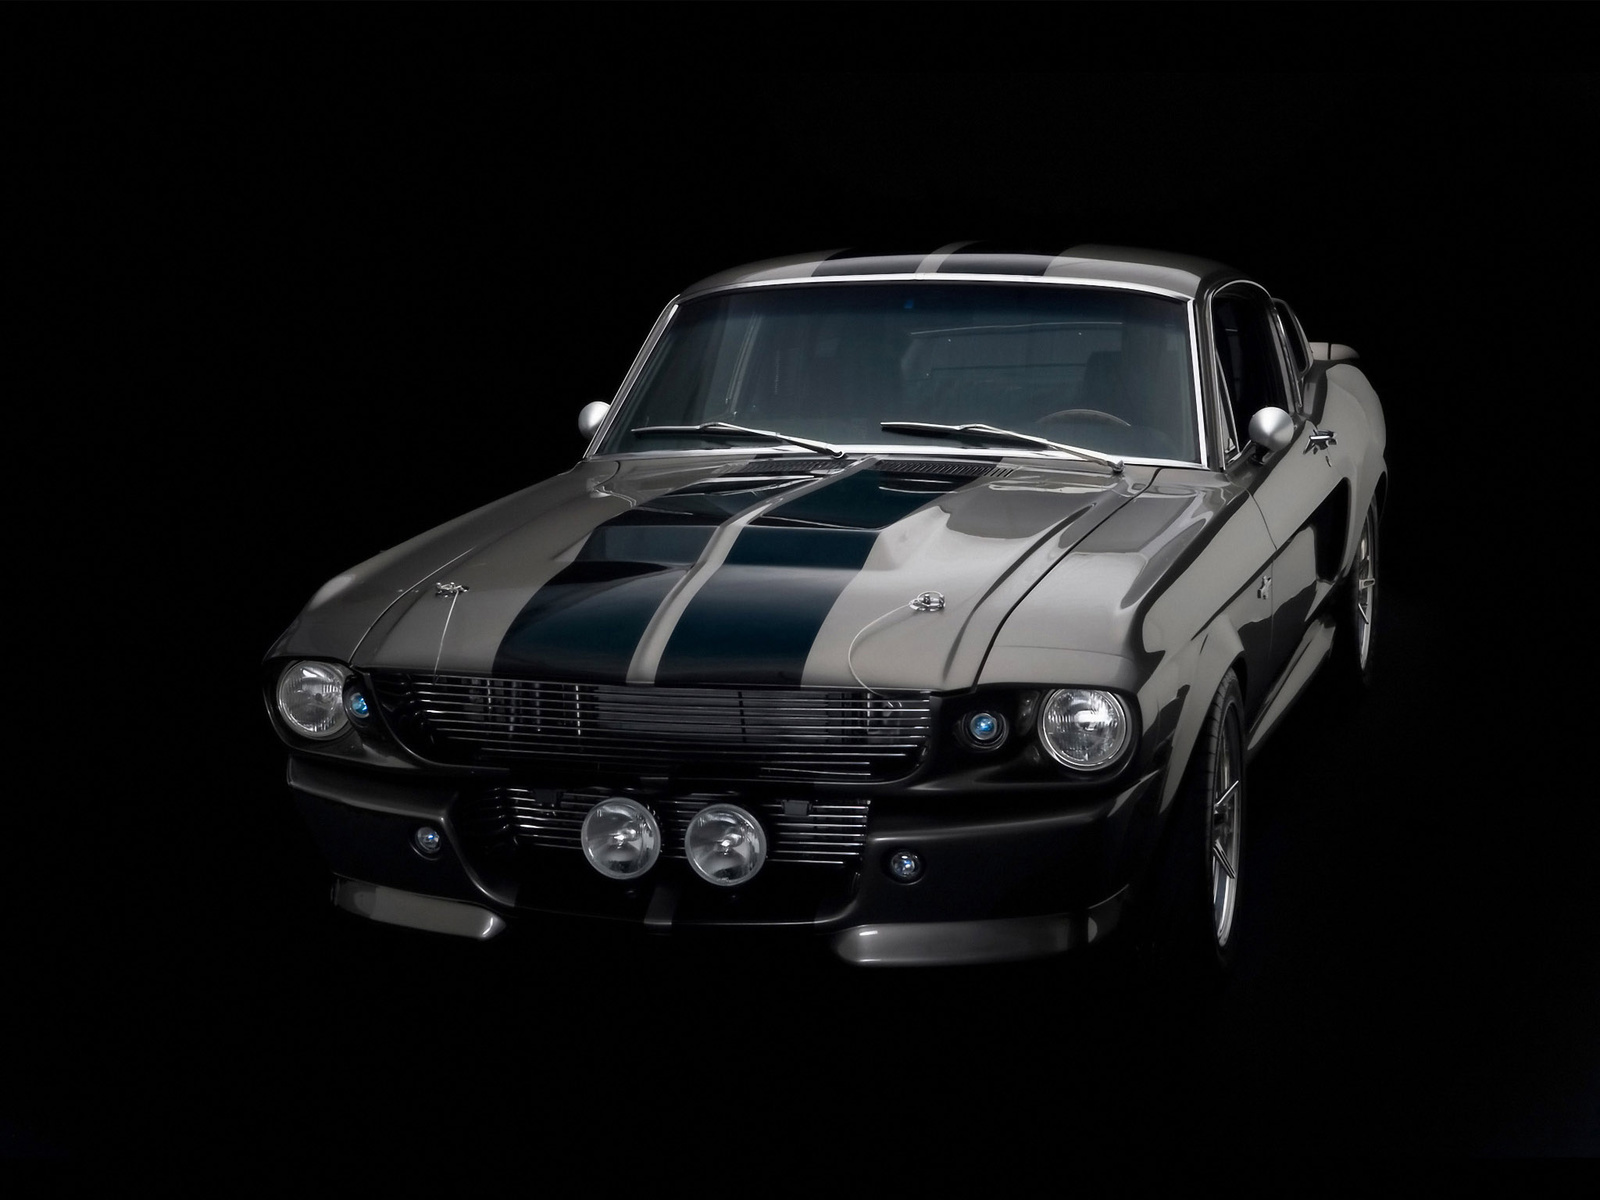 shelby ford-mustang-gt500-eleanor-2000 r10